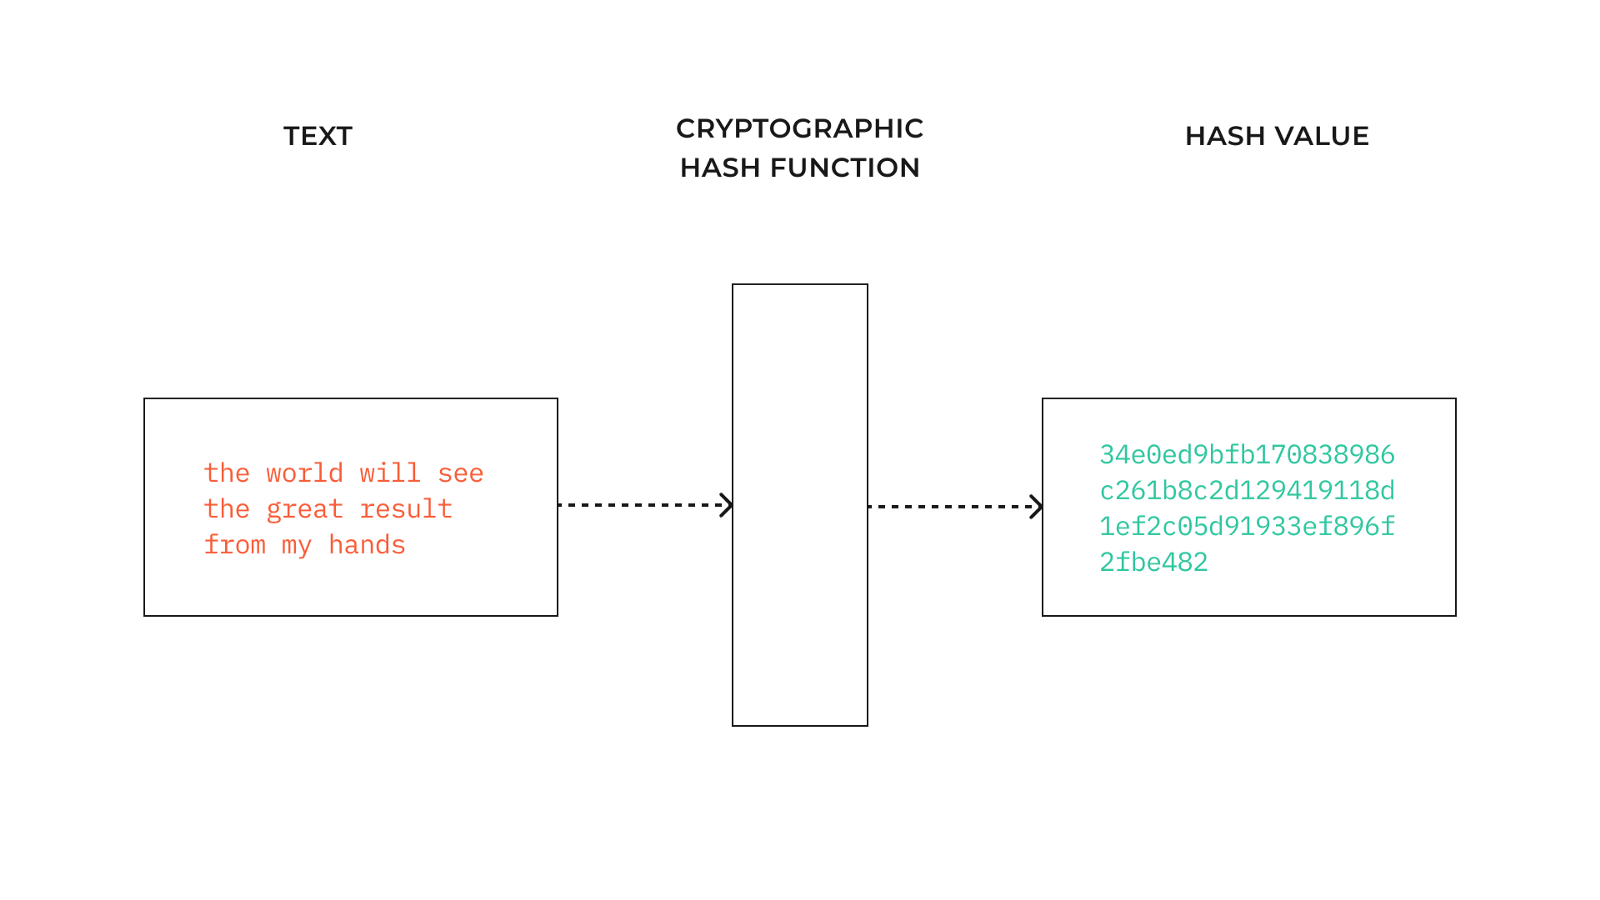 The output of a cryptographic hash function